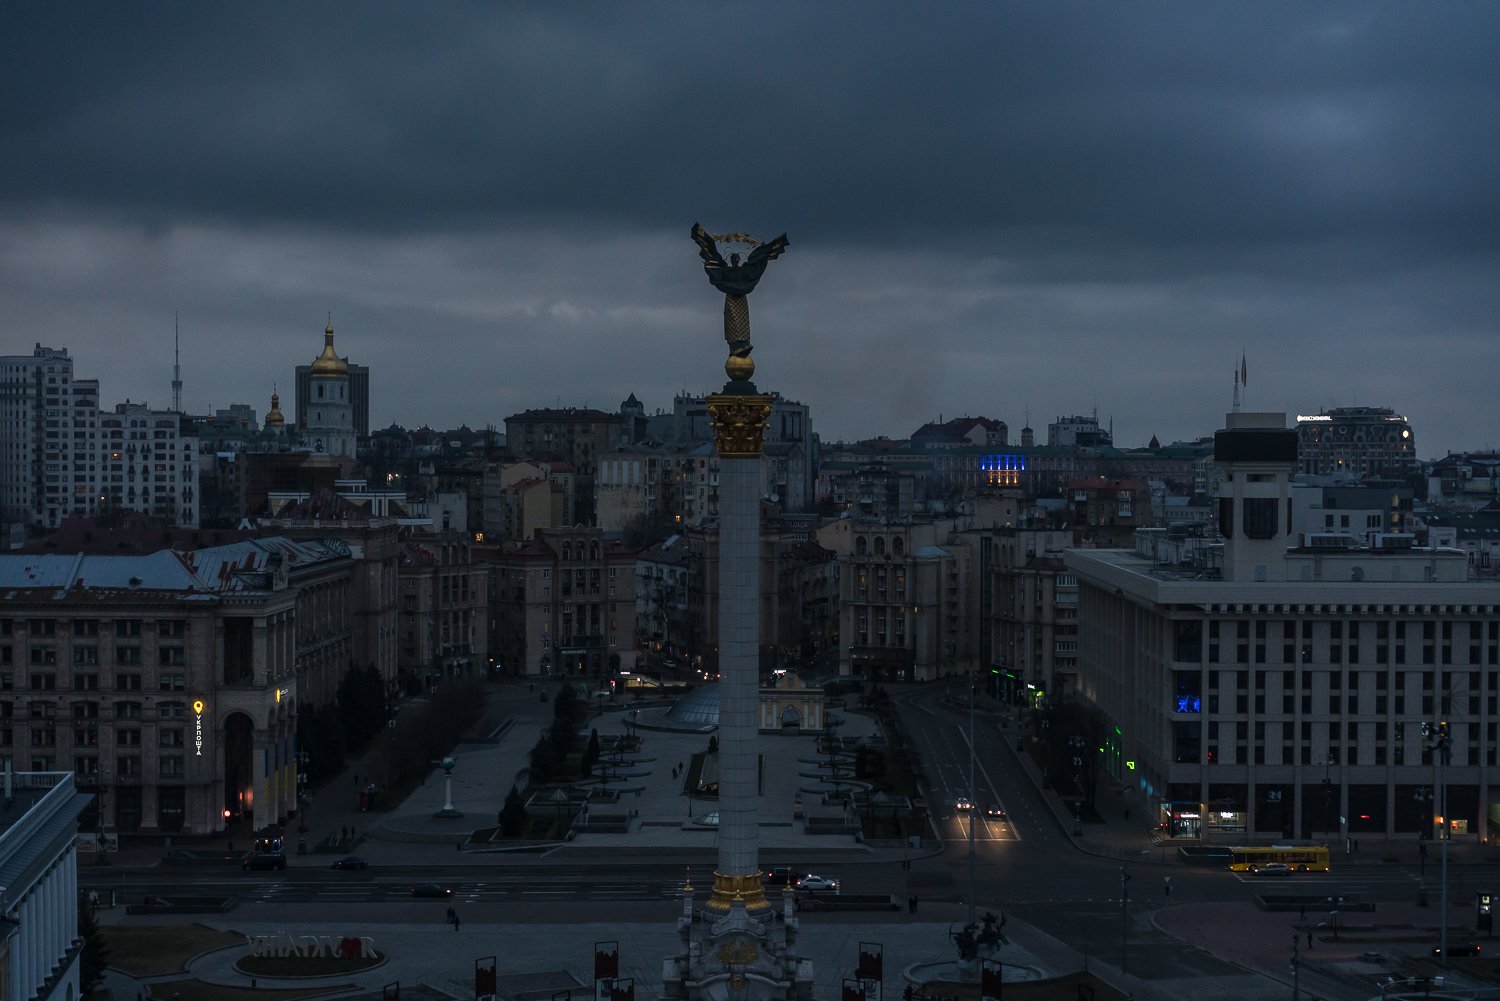  Maidan Nezalezhnosti, or Independence Square, at dusk on the first day of Russia's open invasion of the country on Thursday, February 24, 2022 in Kyiv, Ukraine. The square was the center of the 2014 revolution that ousted Kremlin-aligned Ukrainian p